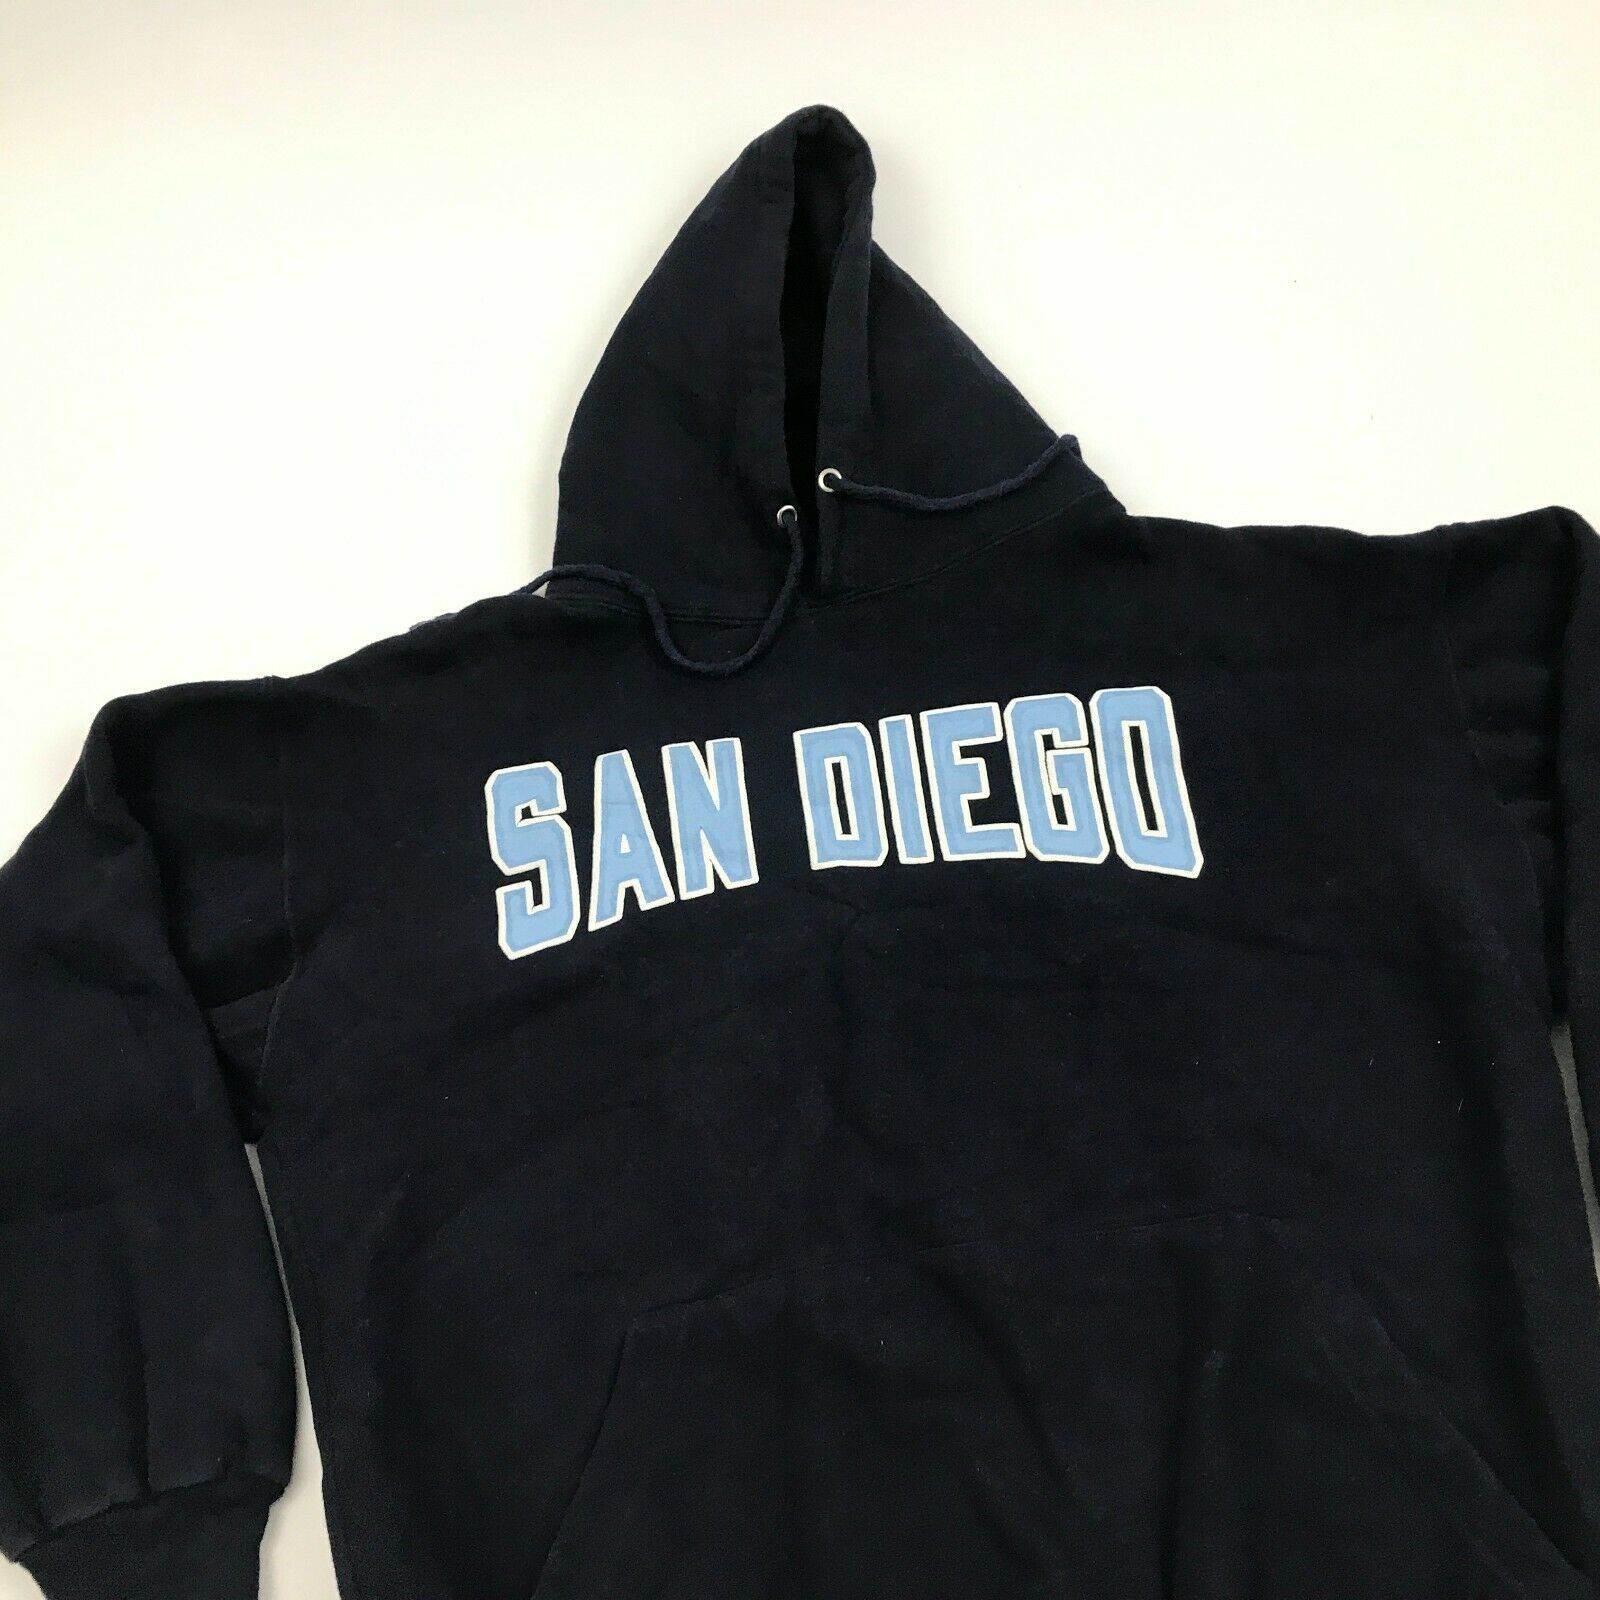 San Diego California Hoodie Sweater Size Small Navy Blue Long Sleeve ...